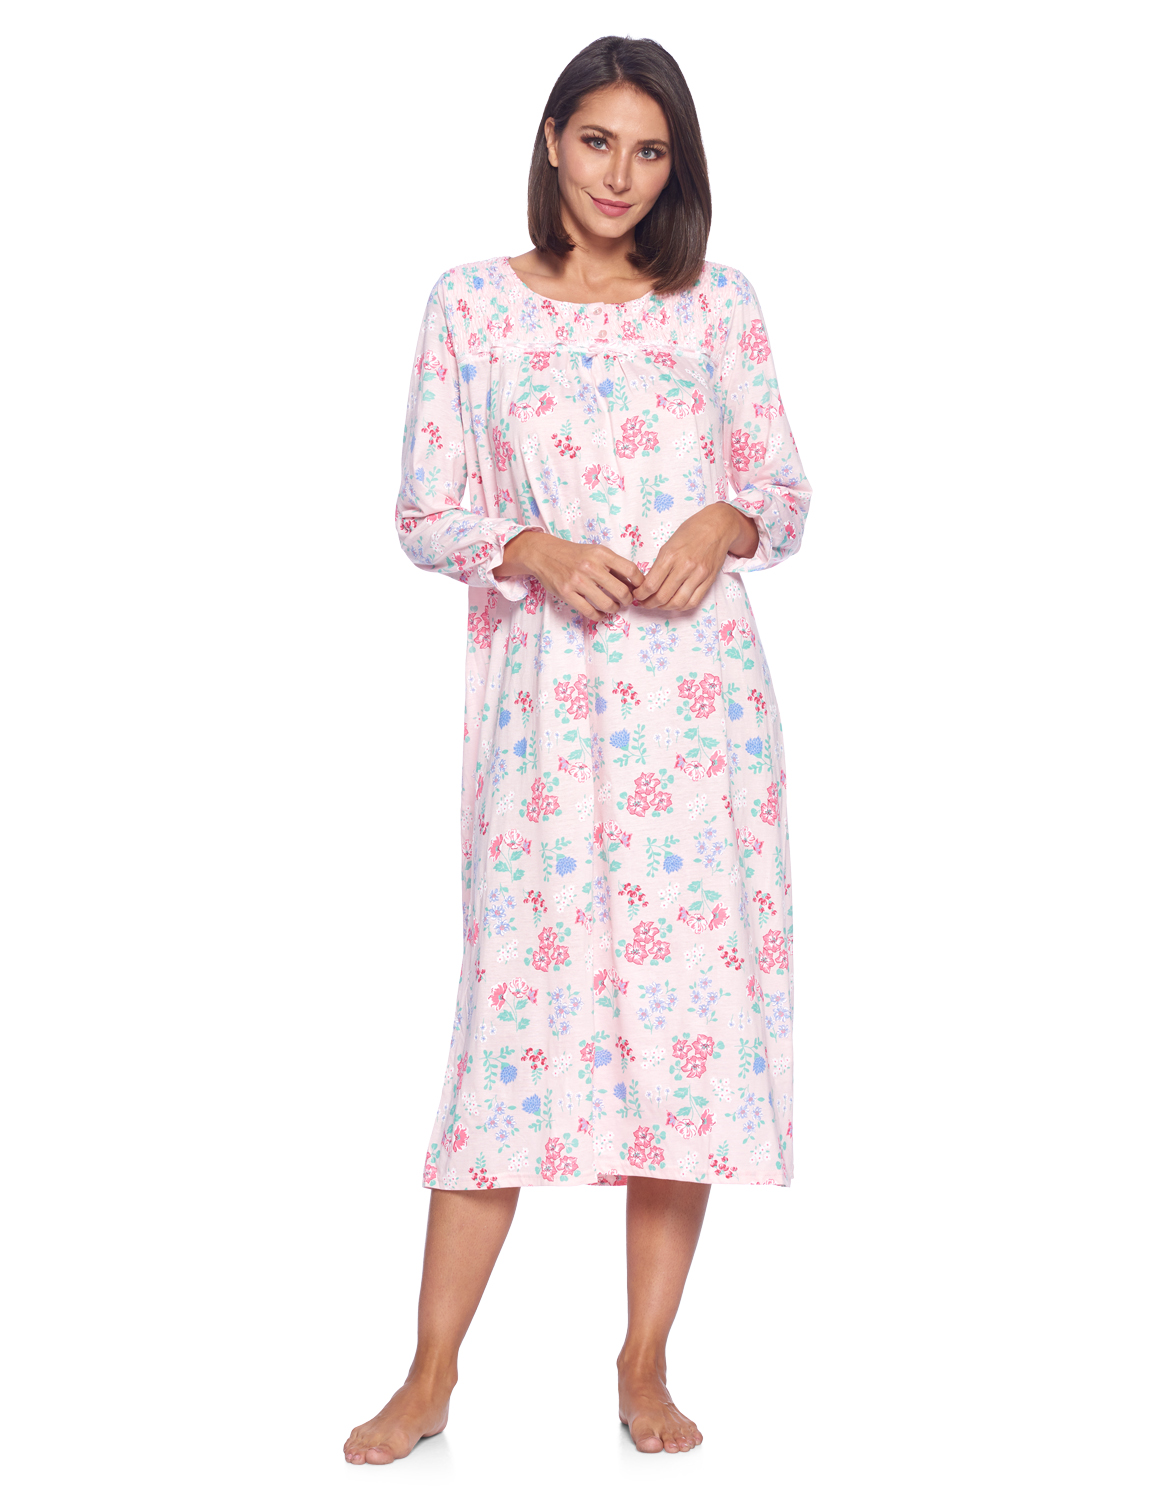 Casual Nights Women's Long Floral & Lace Henley Nightgown - Pink LA671PK